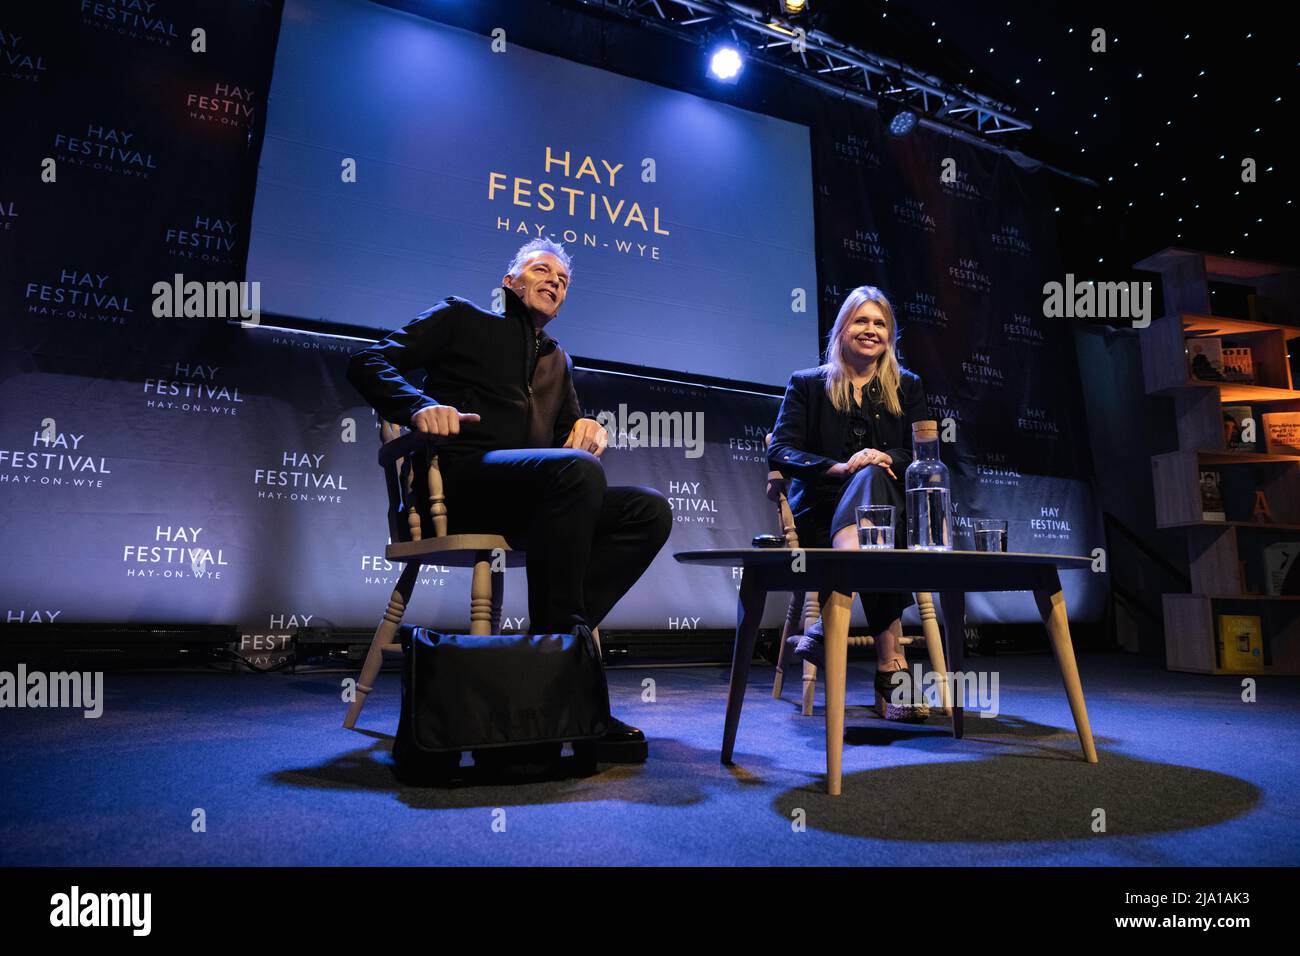 Hay-on-Wye, Wales, UK. 26th May, 2022. Jenny Packham talks to brother and naturalist Chris Packham about How to Make a Dress: Adventures in the Art of Style at Hay Festival 2022, Wales. Credit: Sam Hardwick/Alamy. Stock Photo